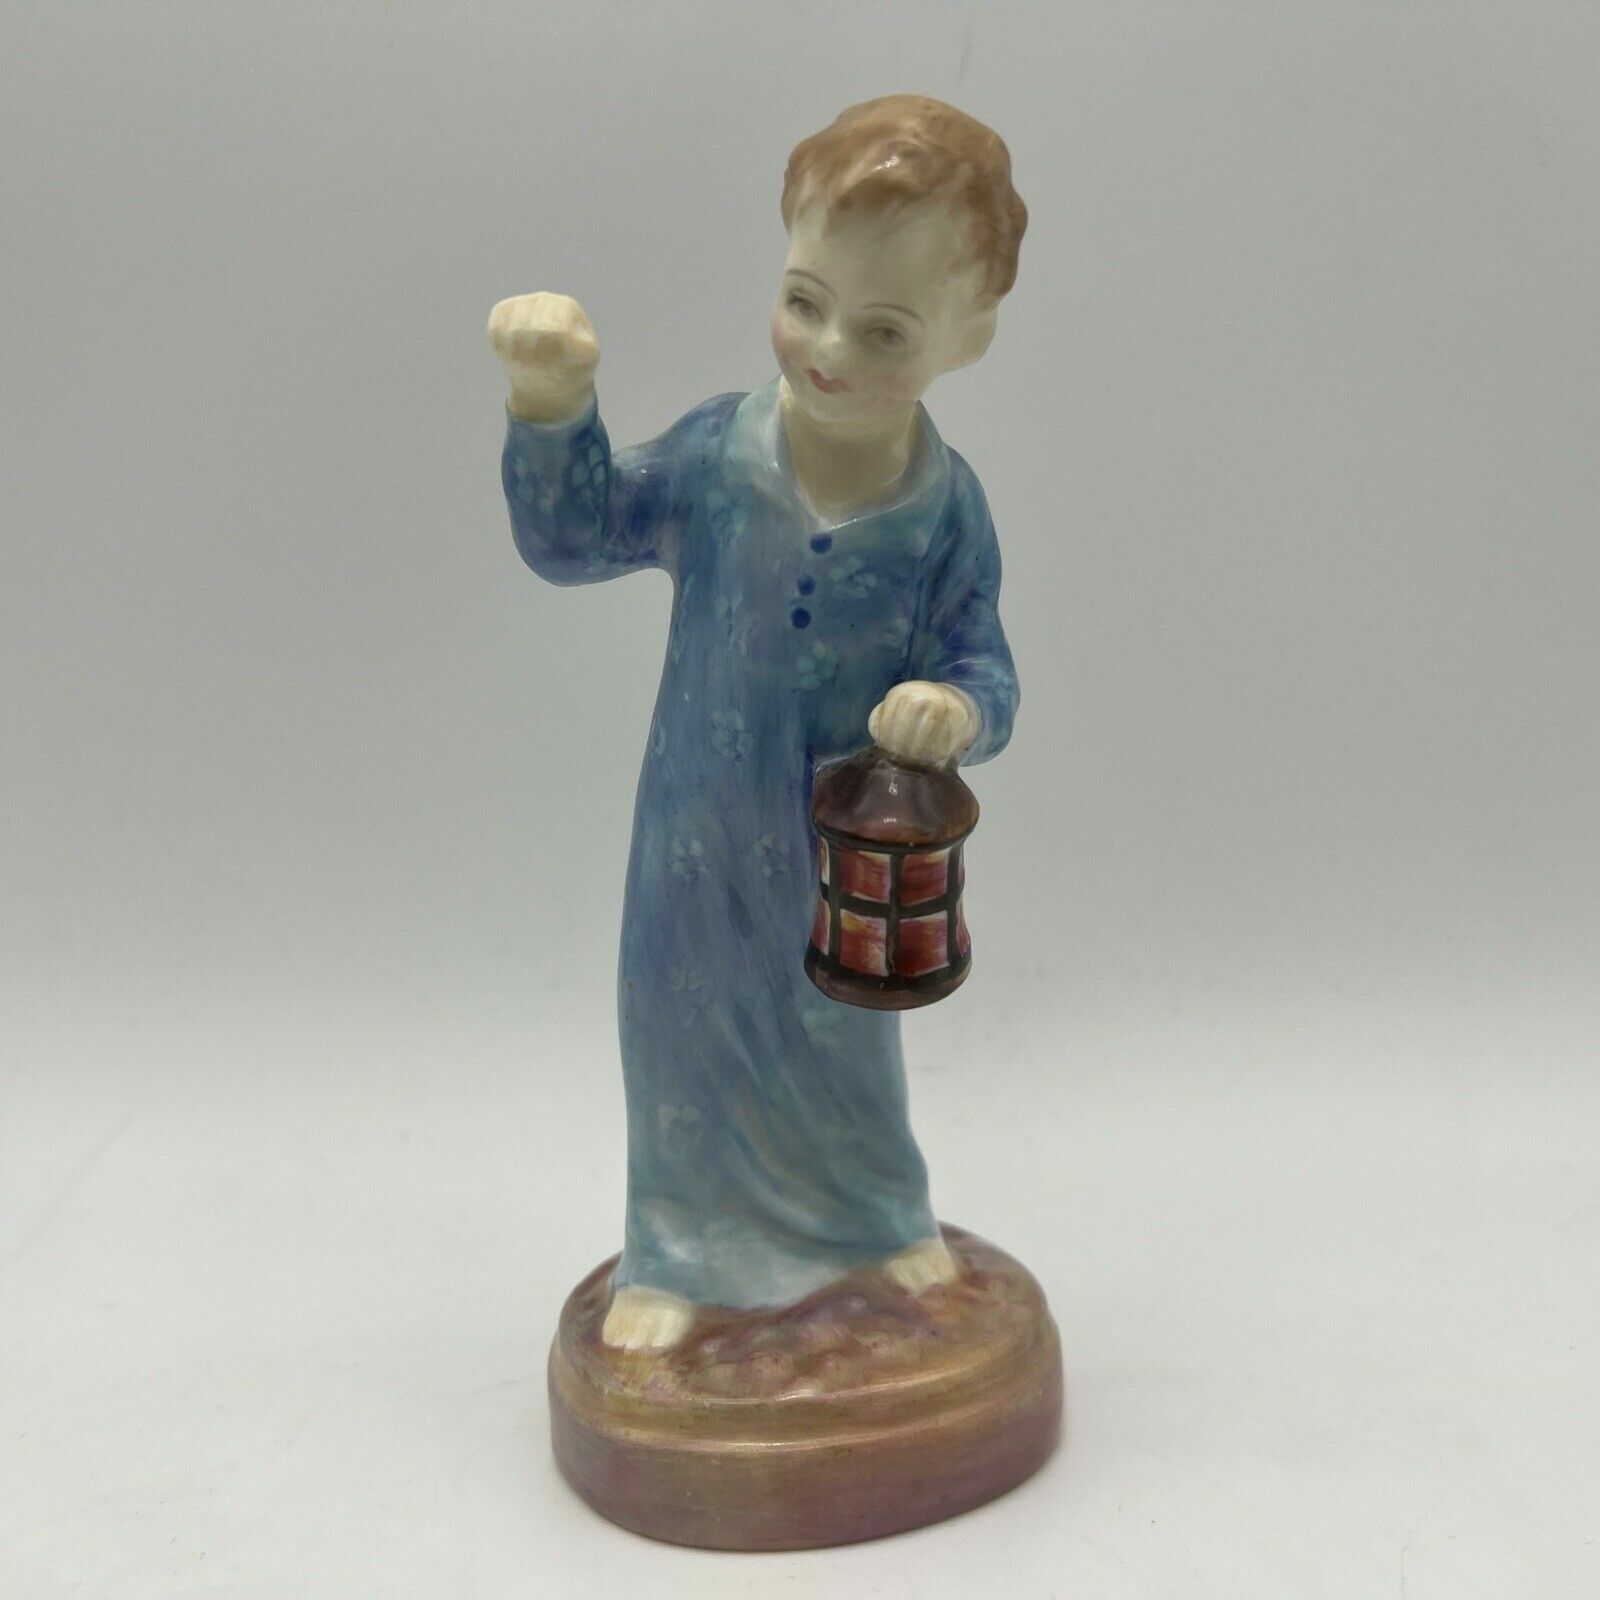 Retired Authentic Royal Doulton Figurine Wee Willie Winkie Lantern HN 2050 MINT